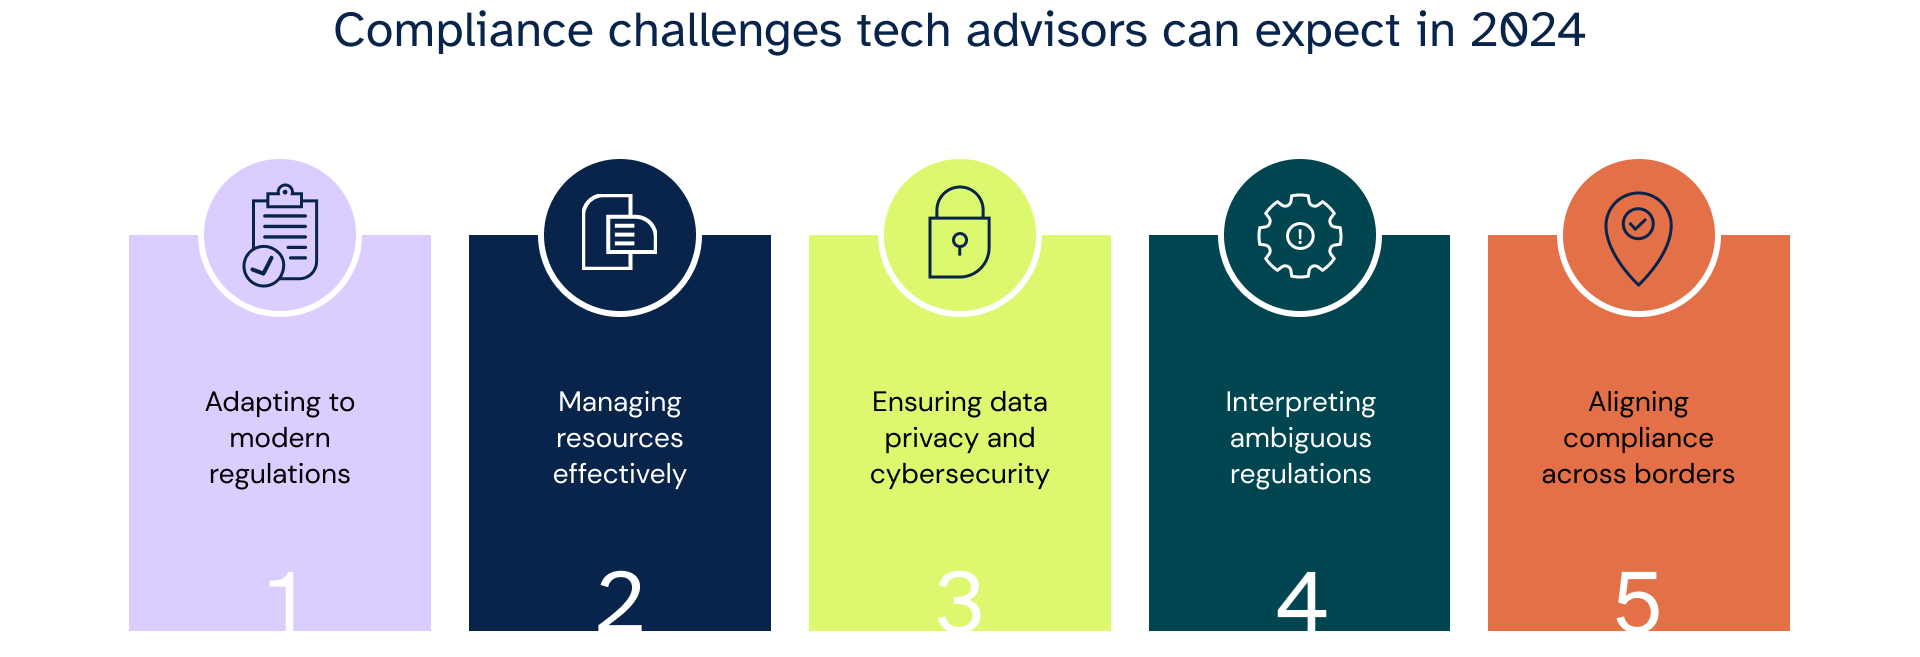 Compliance challenges tech advisors can expect in 2024